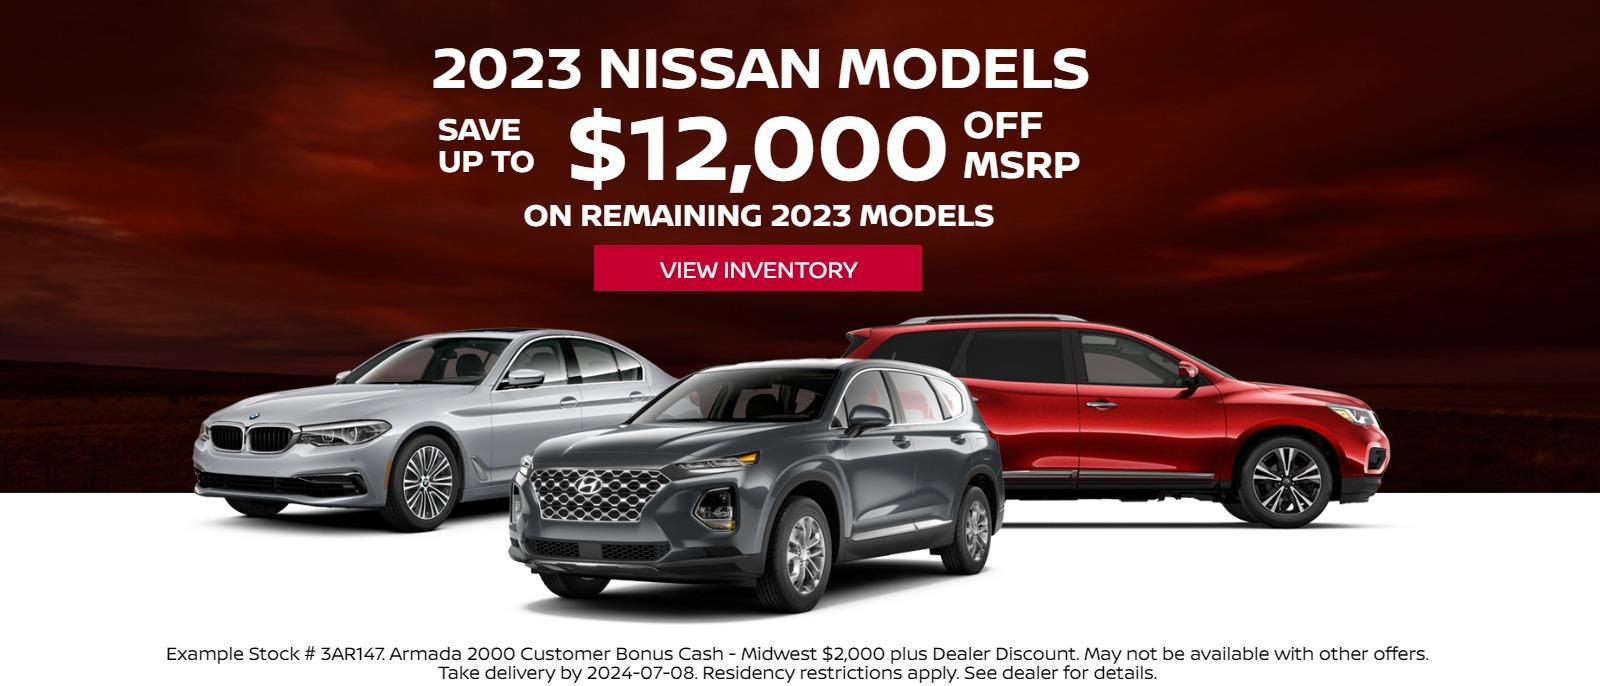 Save Up to $12,000 off MSRP on remaining 2023 models